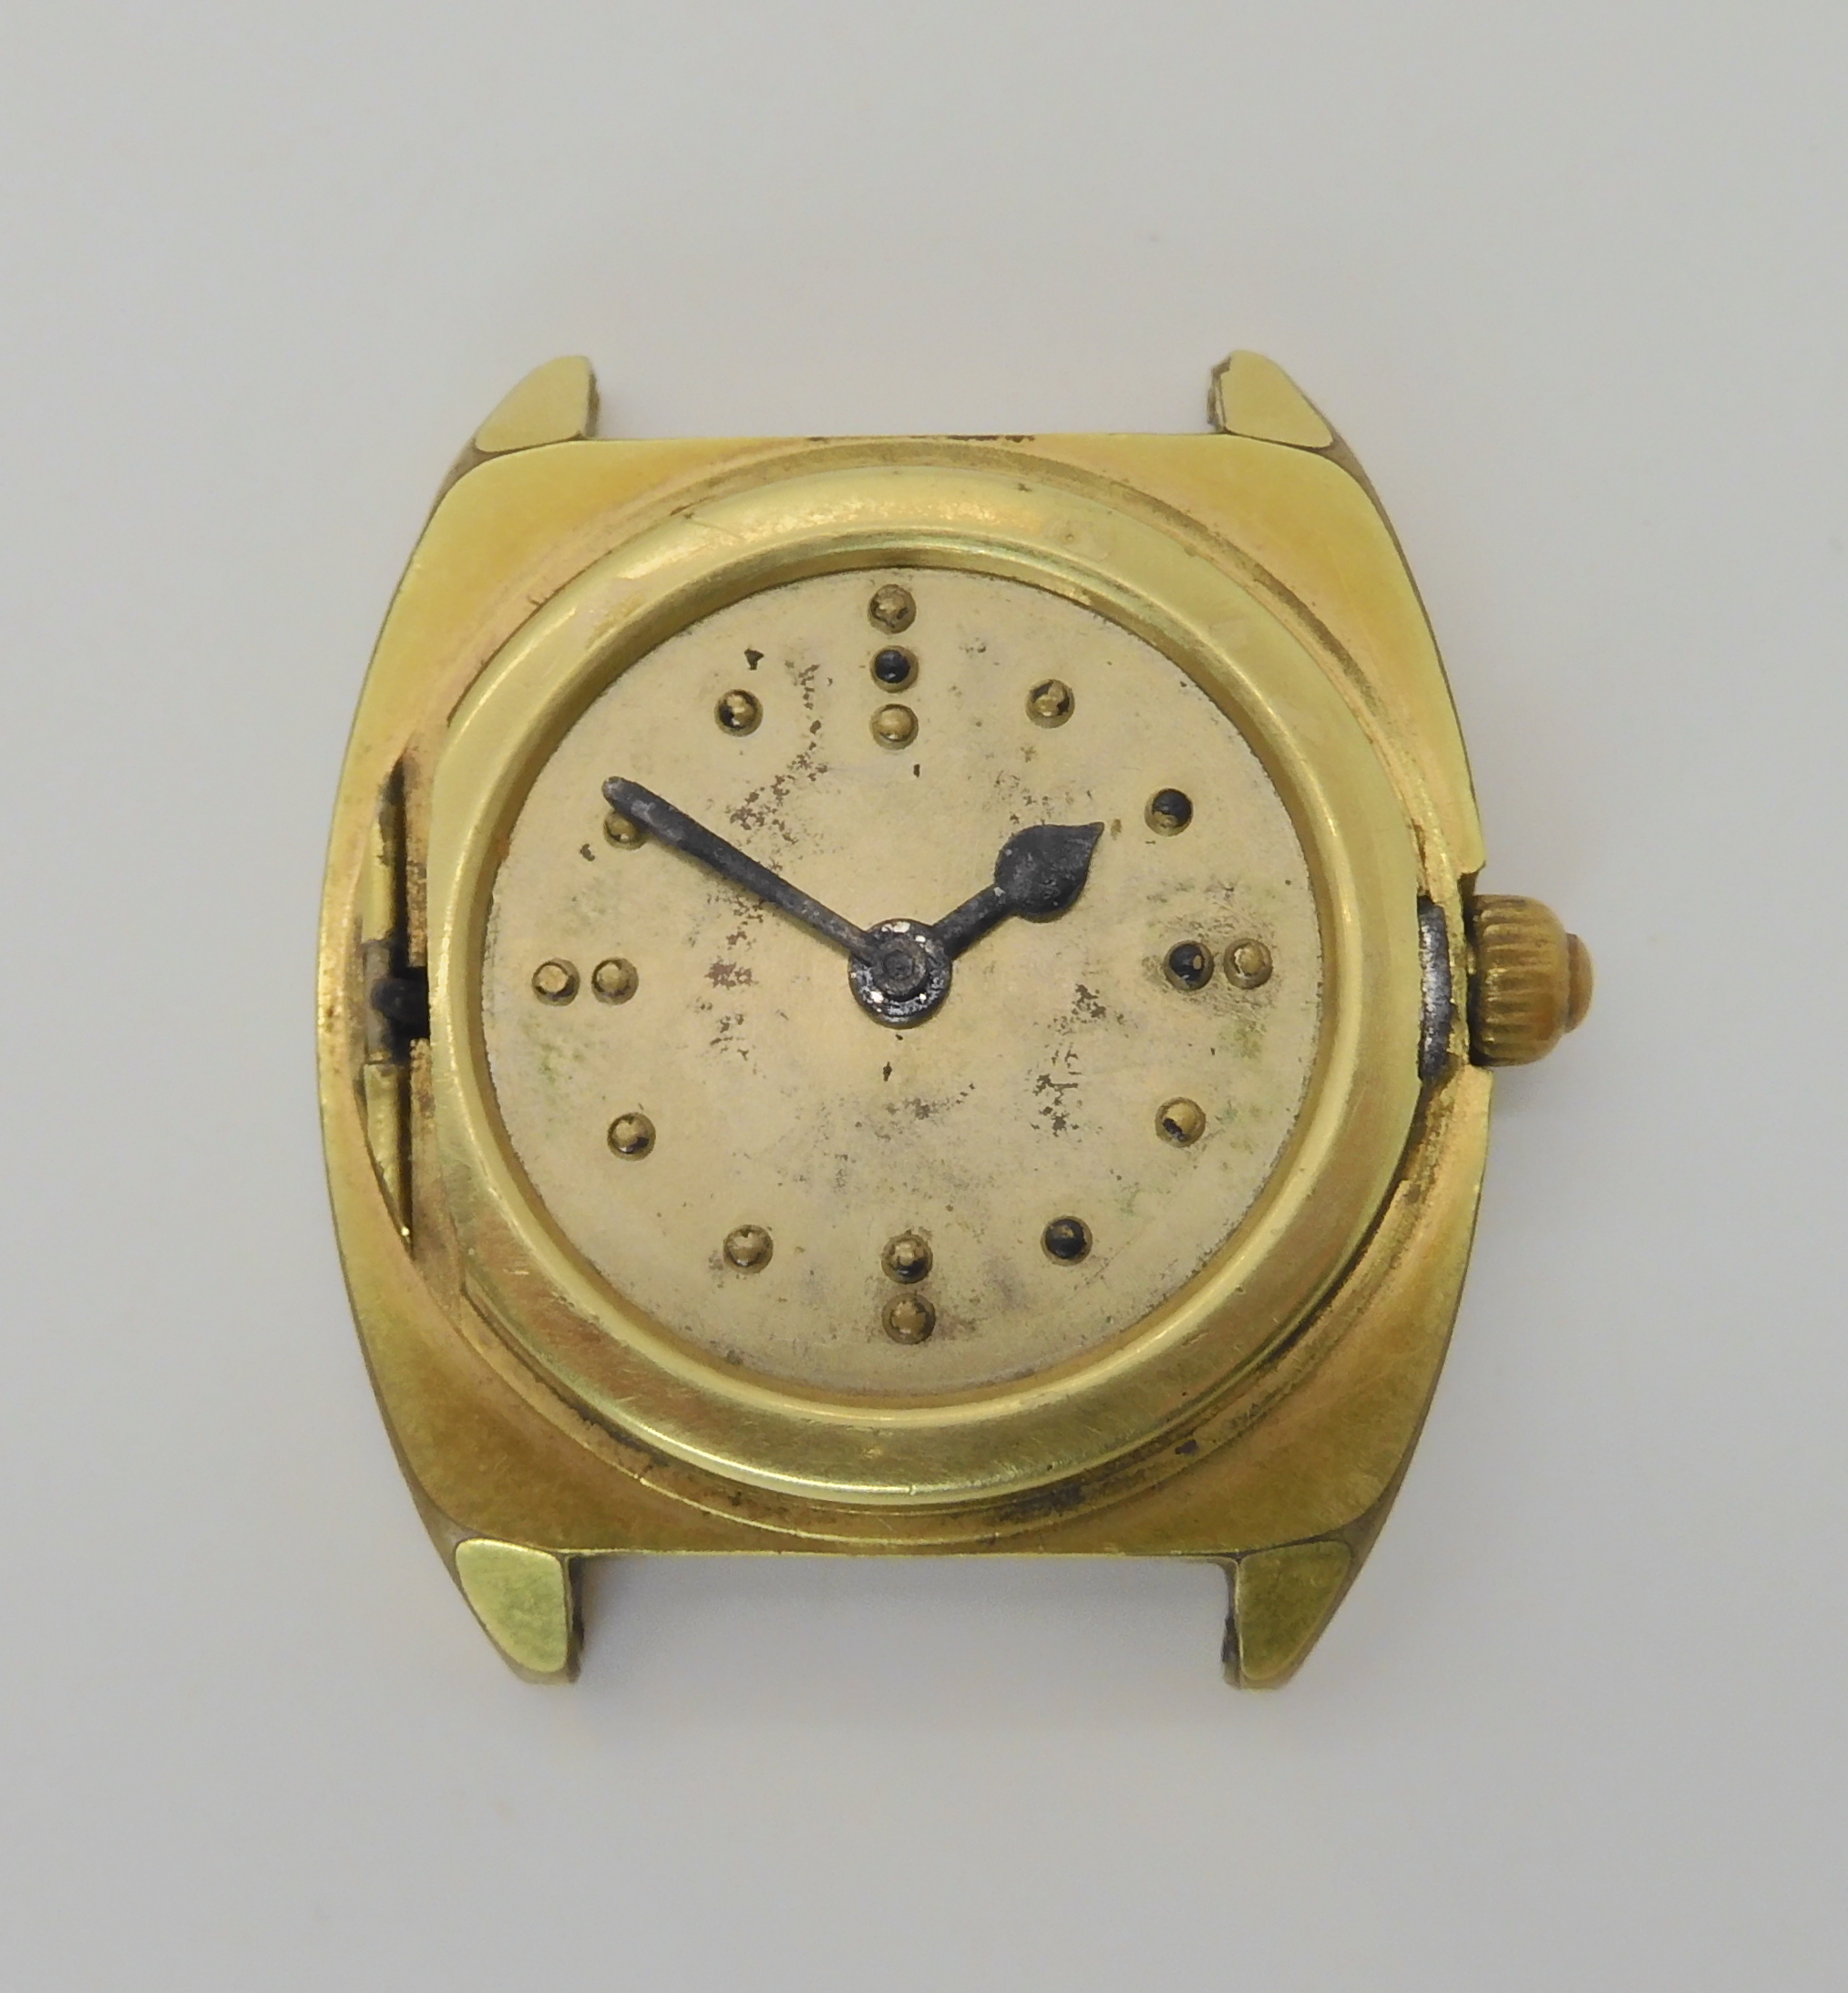 AN AMERICAN FEDERATION FOR THE BLIND BRAIL WATCH case dimensions 3.4cm x 4cm, with an automatic